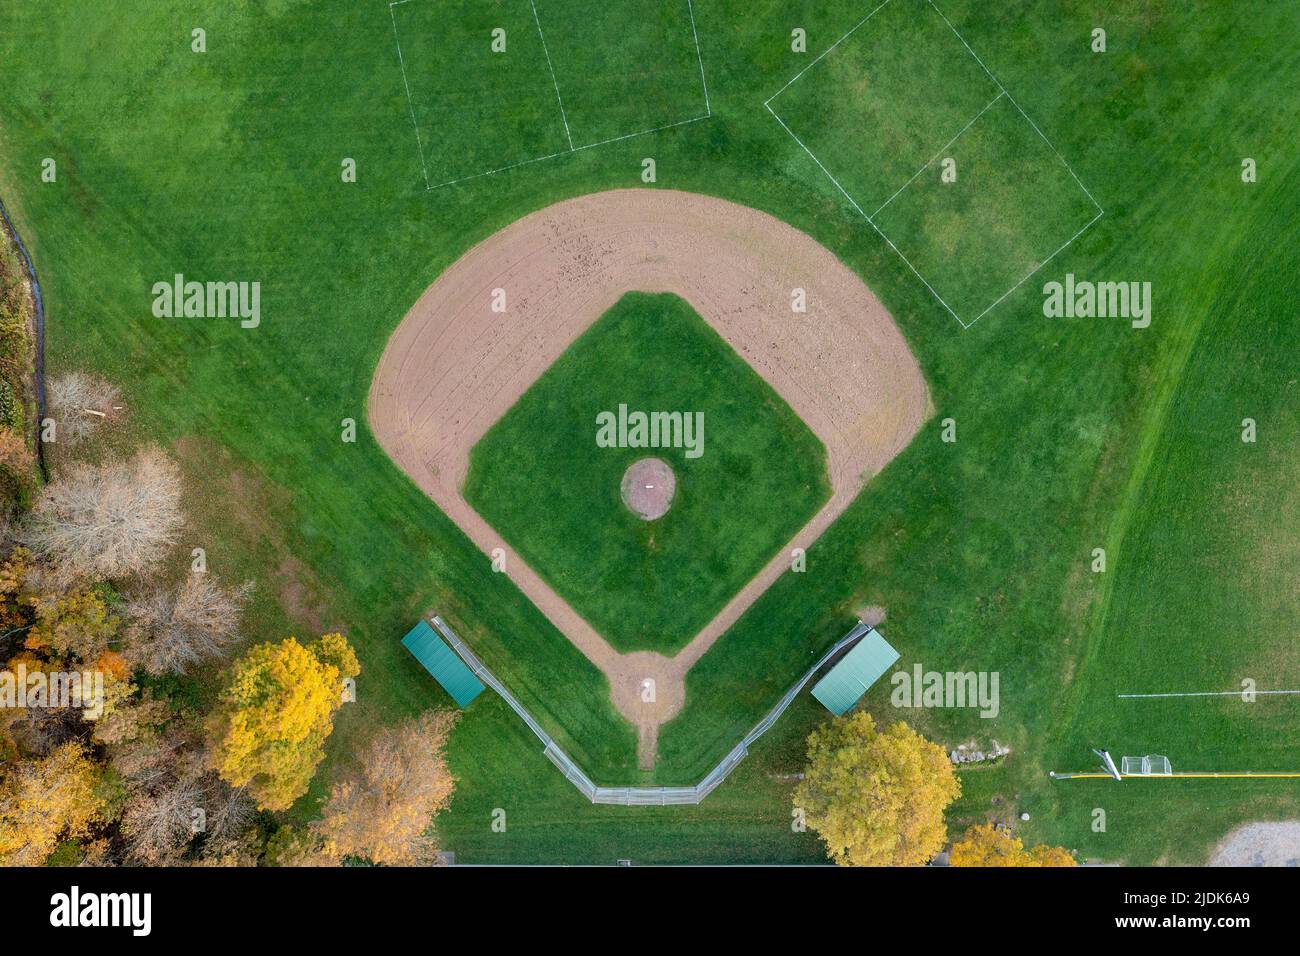 Aerial view of a grassy baseball diamond in Stowe, Vermont. Stock Photo